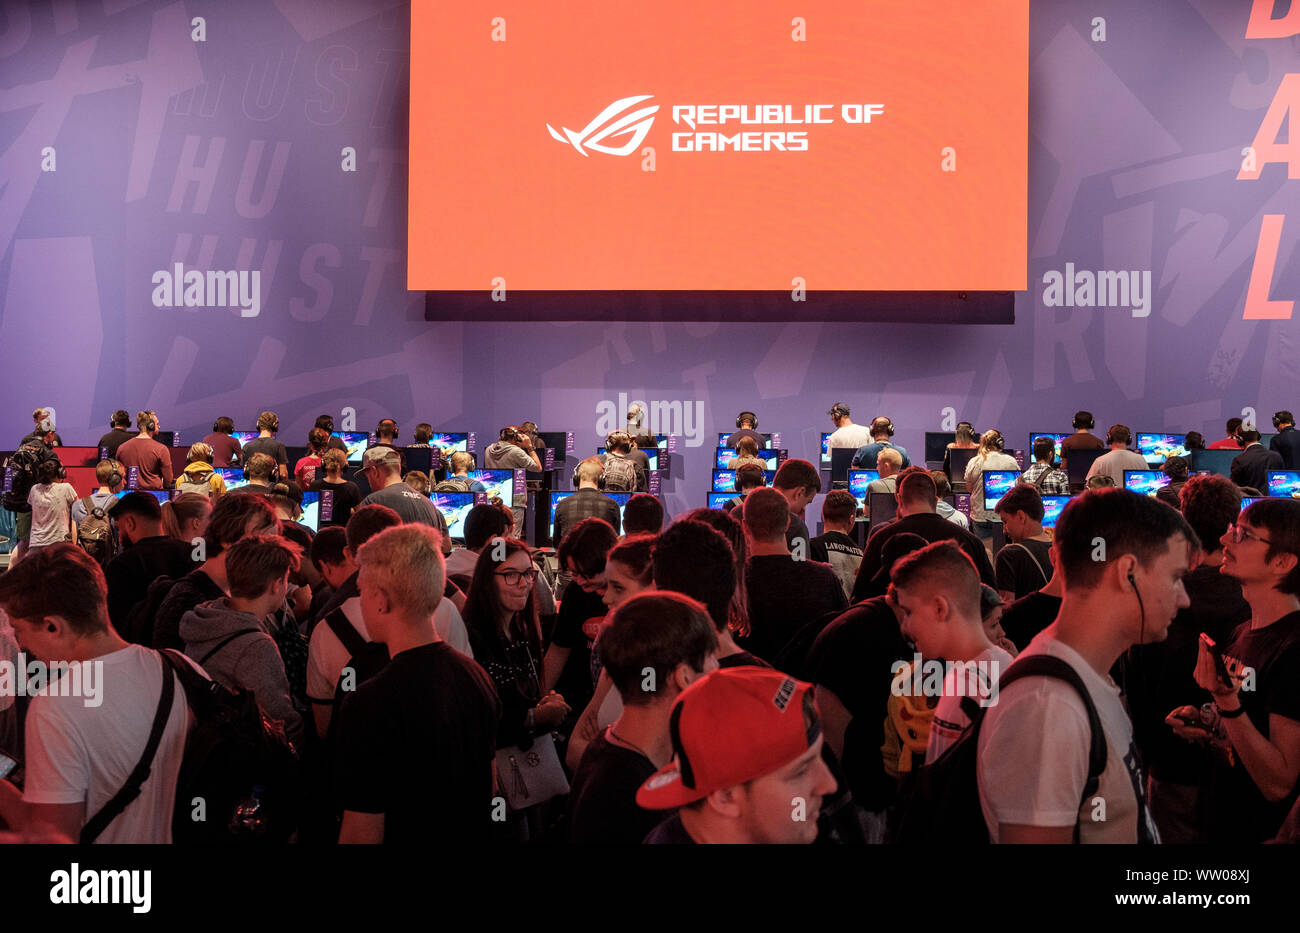 visitors play car racing game  below large screen displaying the phrase „Republic of Gamers“ at gamescom , world’s largest trade fair for computer and video games in Cologne, Germany on  August 21, 2019 Stock Photo